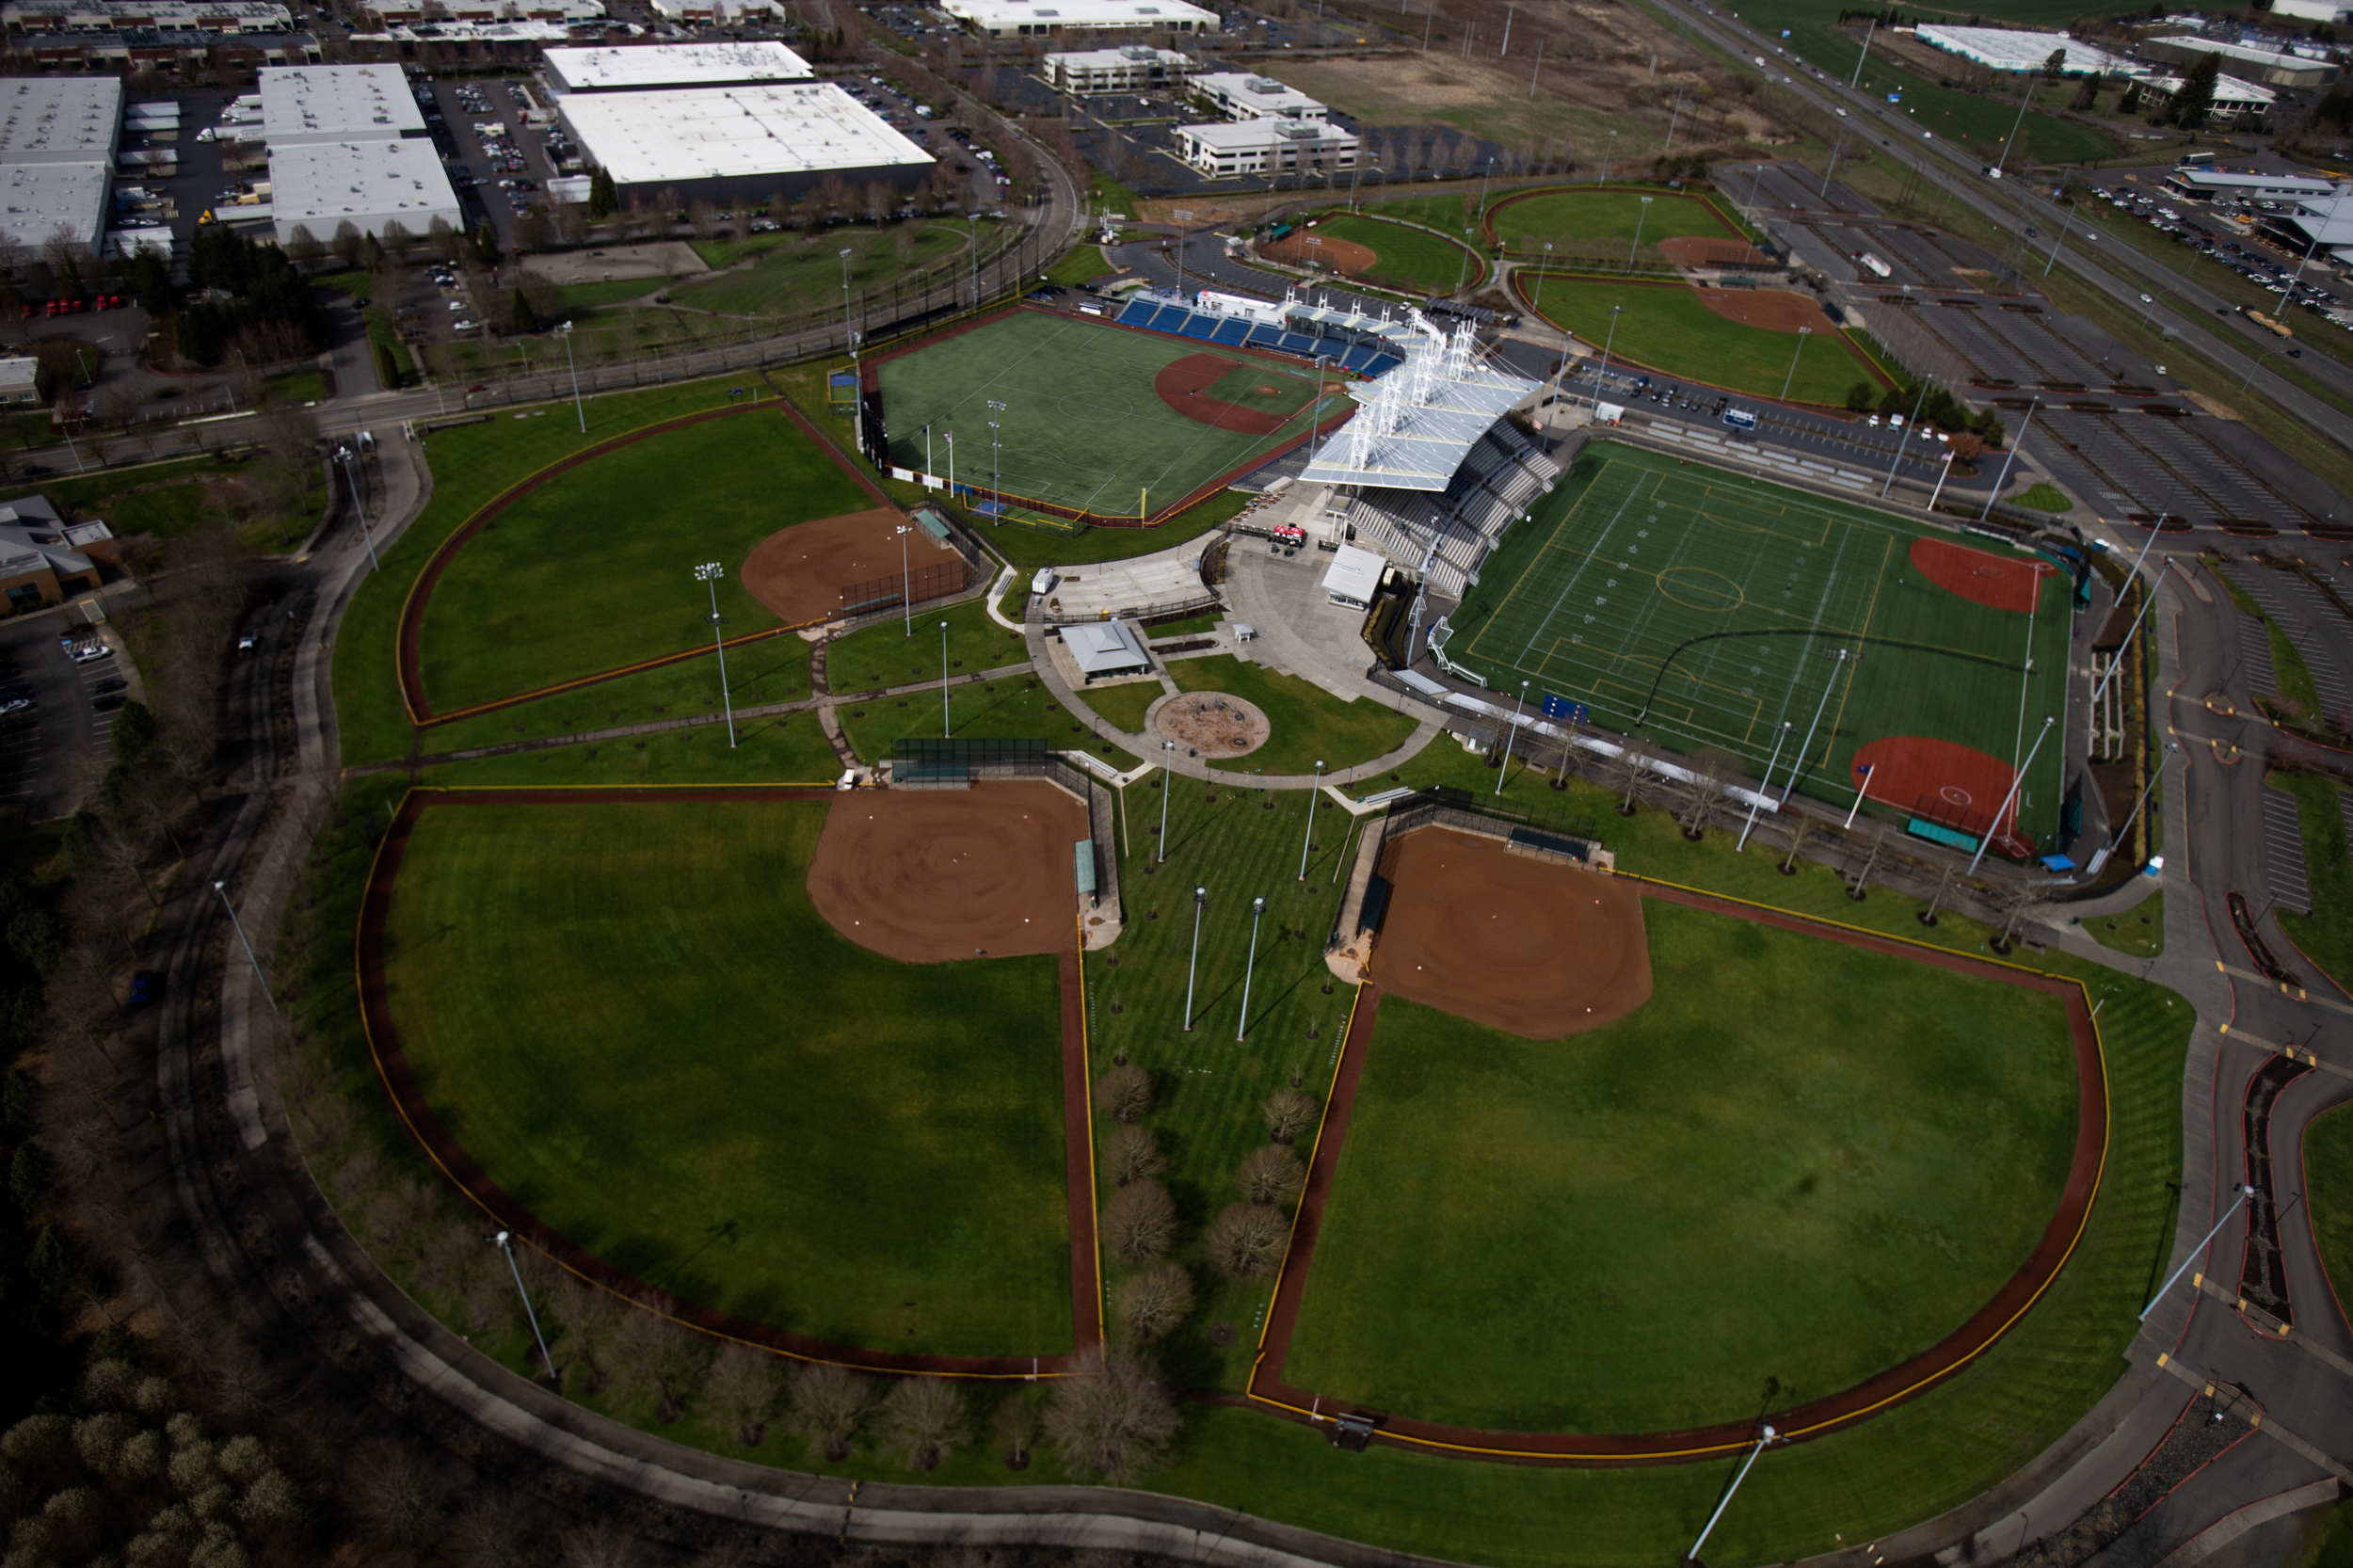 Could MLB team hop to new home in Hillsboro?